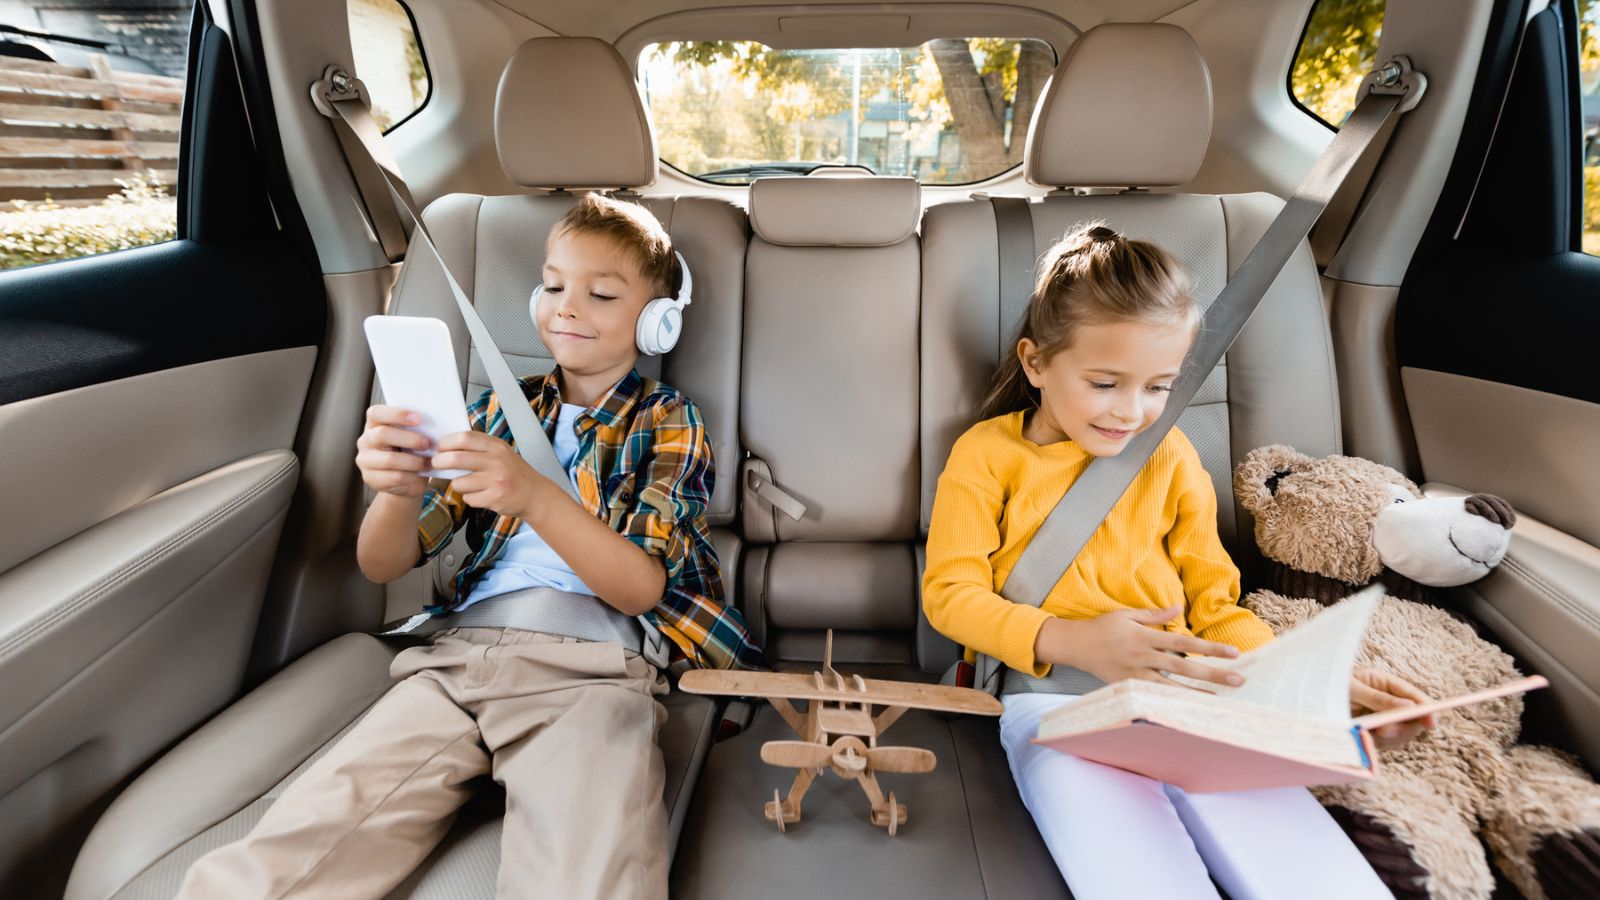 Want To Use Uber Or Lyft With Kids